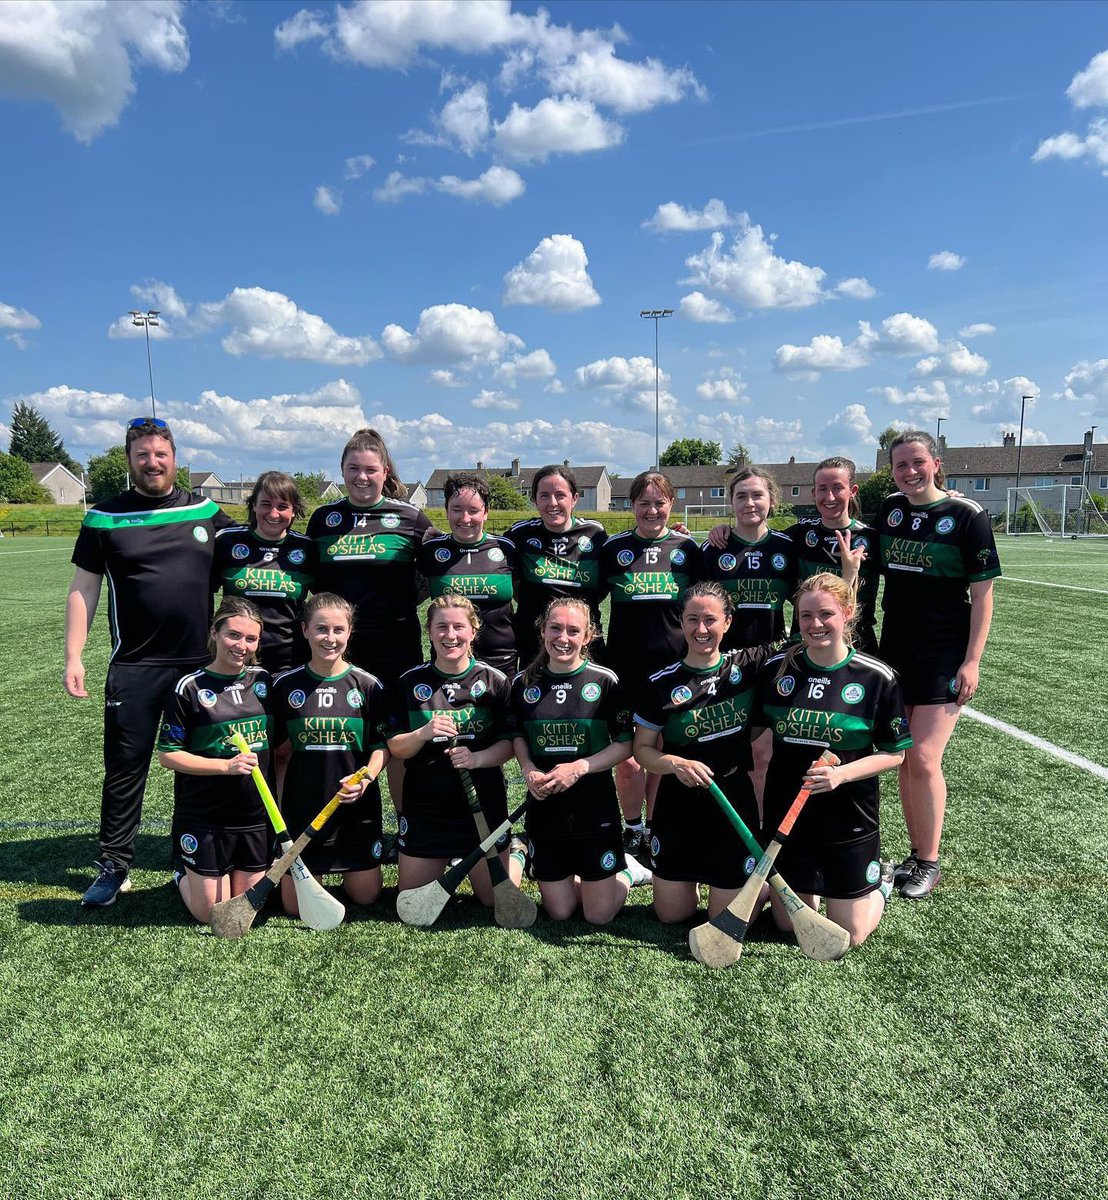 ⚫️Big weekend for Ceann Creige🟢
Hard luck to our senior camogs in their game against @taracamogie but a hard fought game on a scorching Sunday 👏 Thank you to the Tara Camogs for travelling from London to play us in sunny Glasgow 🌞